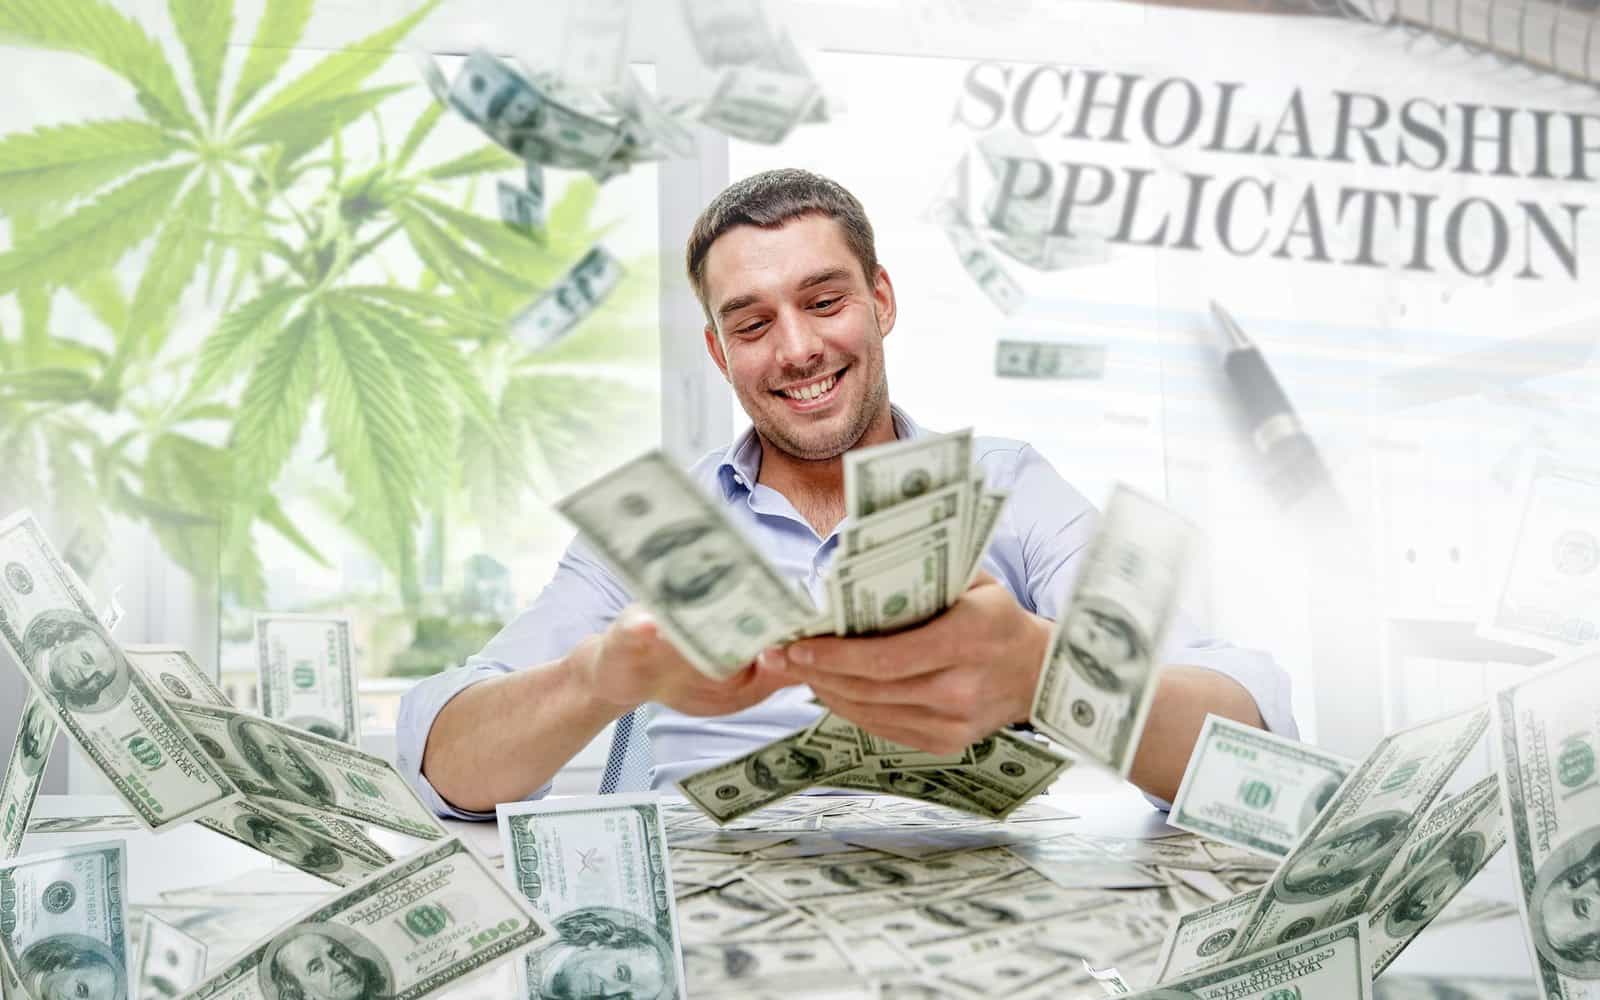 Weed Taxes Are Now Funding Scholarships in Colorado